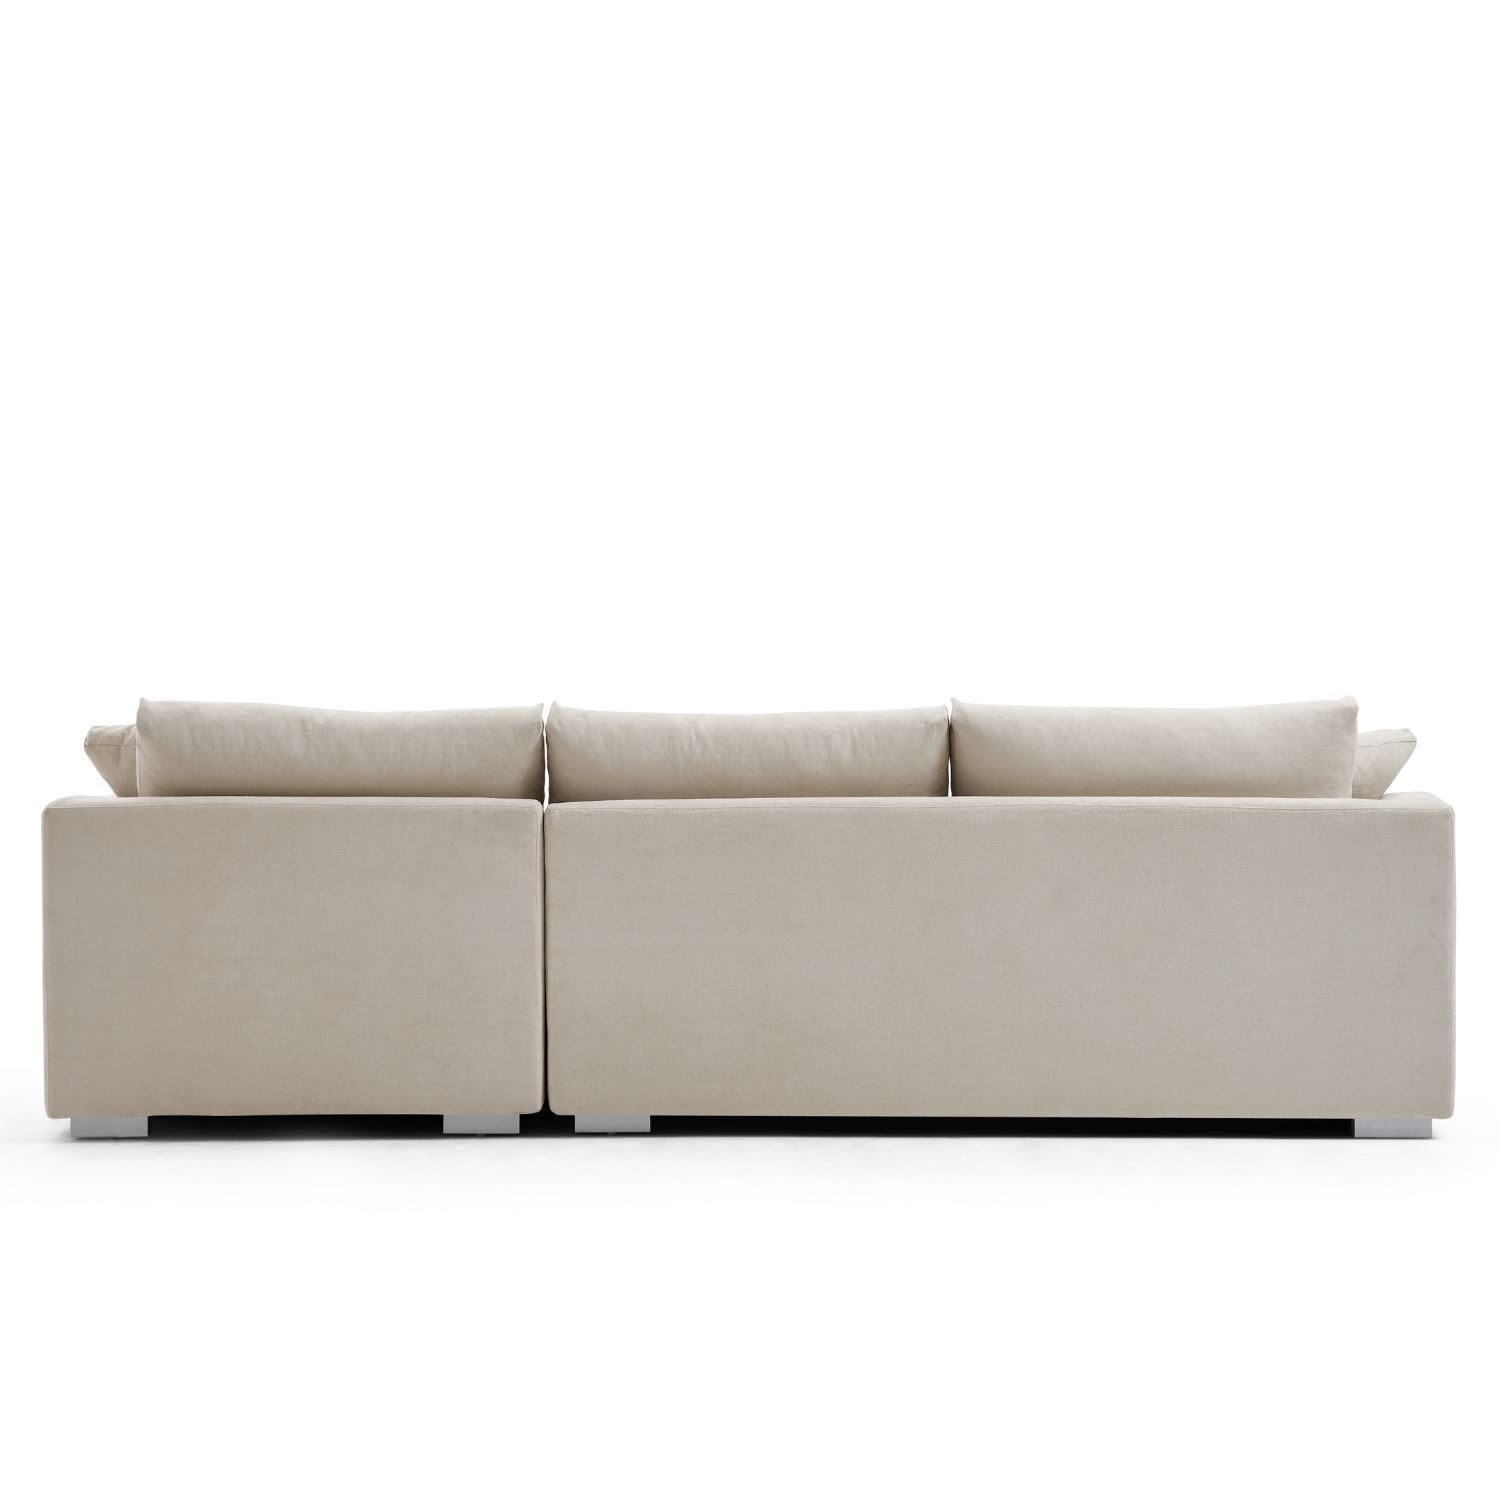 Feathers Sectional Sofa Mario Capasa Beige 88 inch Facing Right